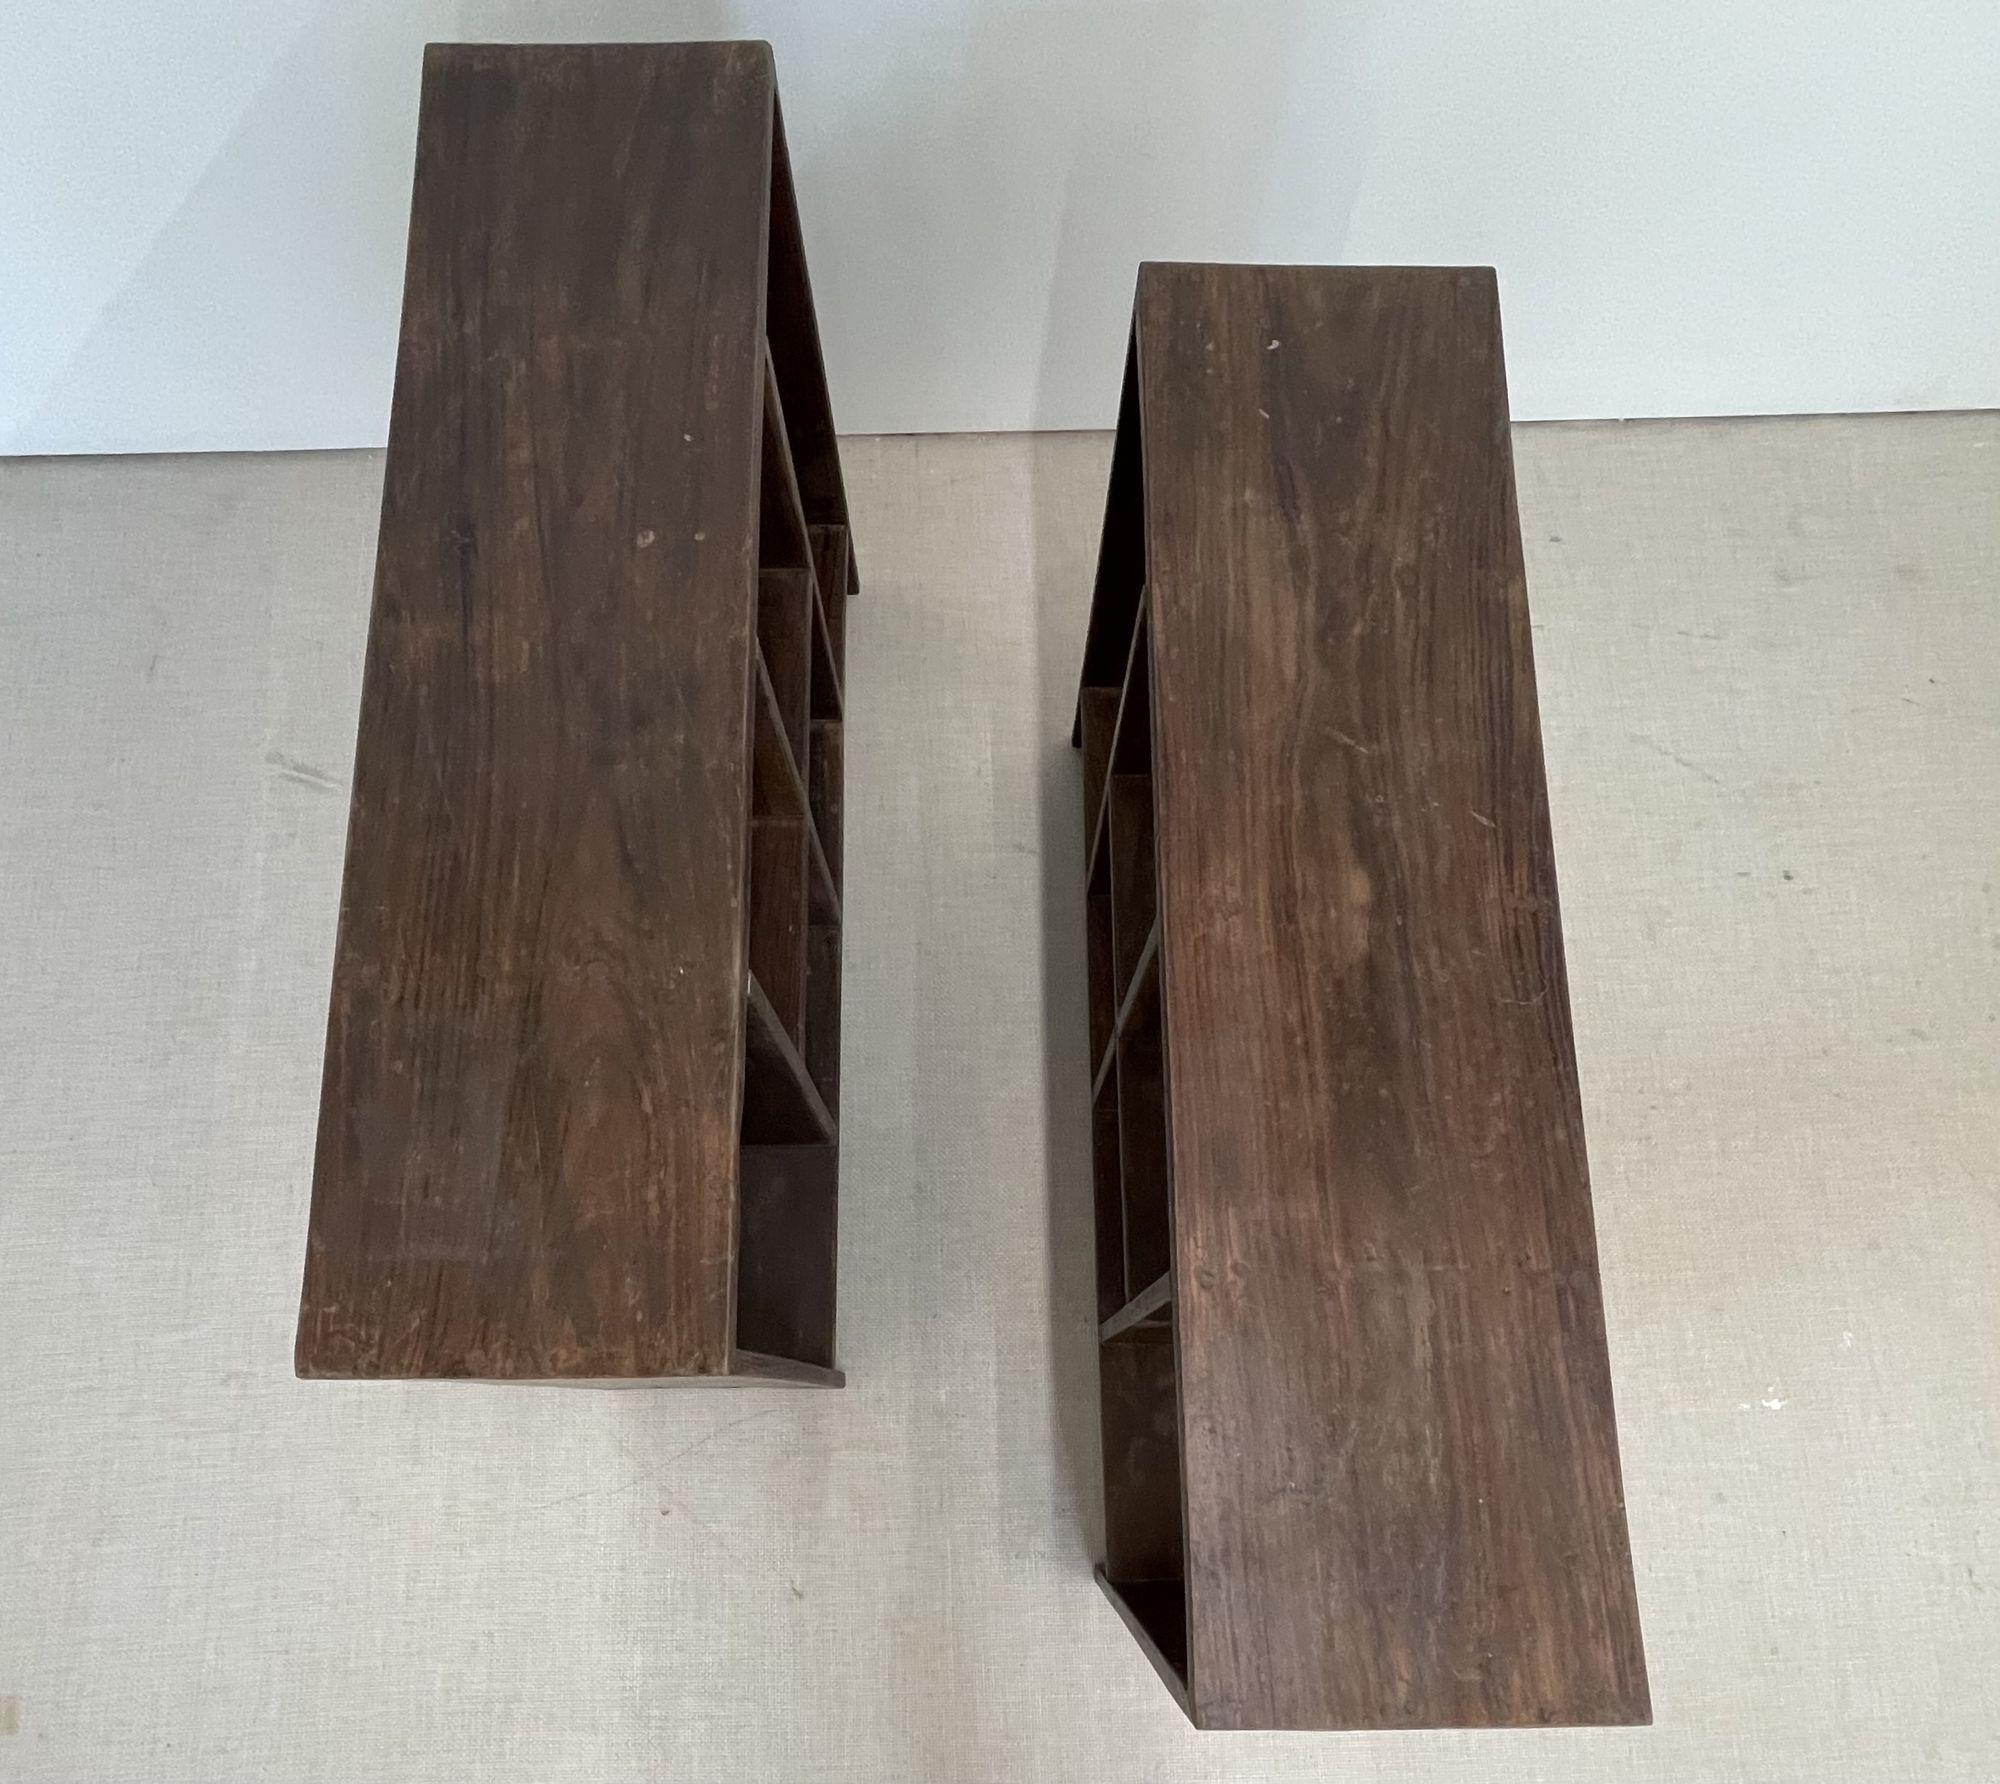 Pair of Authentic Pierre Jeanneret Bookcases / Shelving Unit, Mid-Century Modern 1